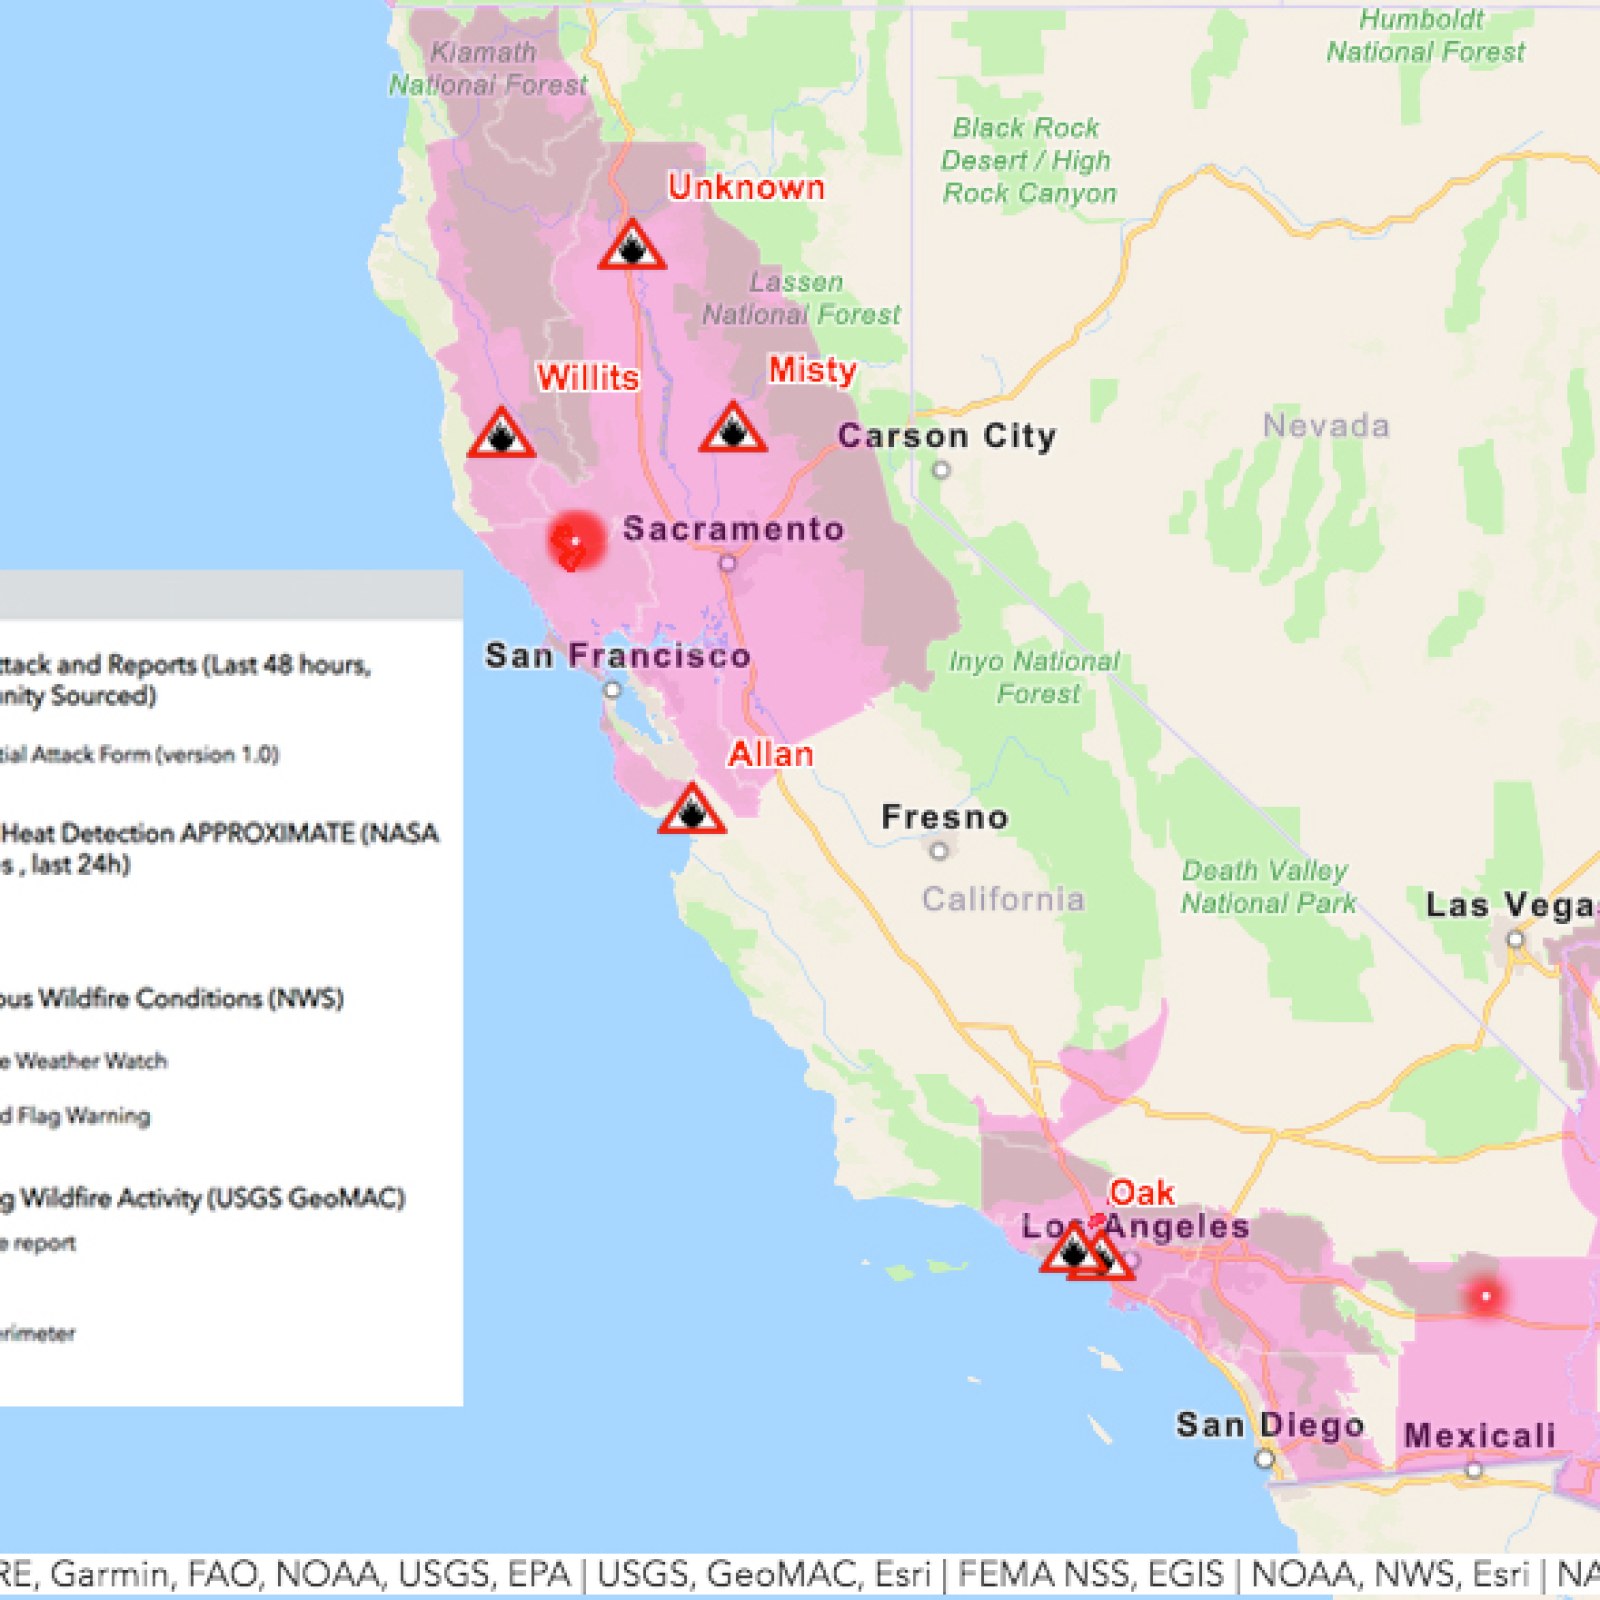 California Fire Map Getty Fire Kincade Fire Tick Fire Burris Fire Oak Fire Updates As First Ever Extreme Red Flag Warning Issued